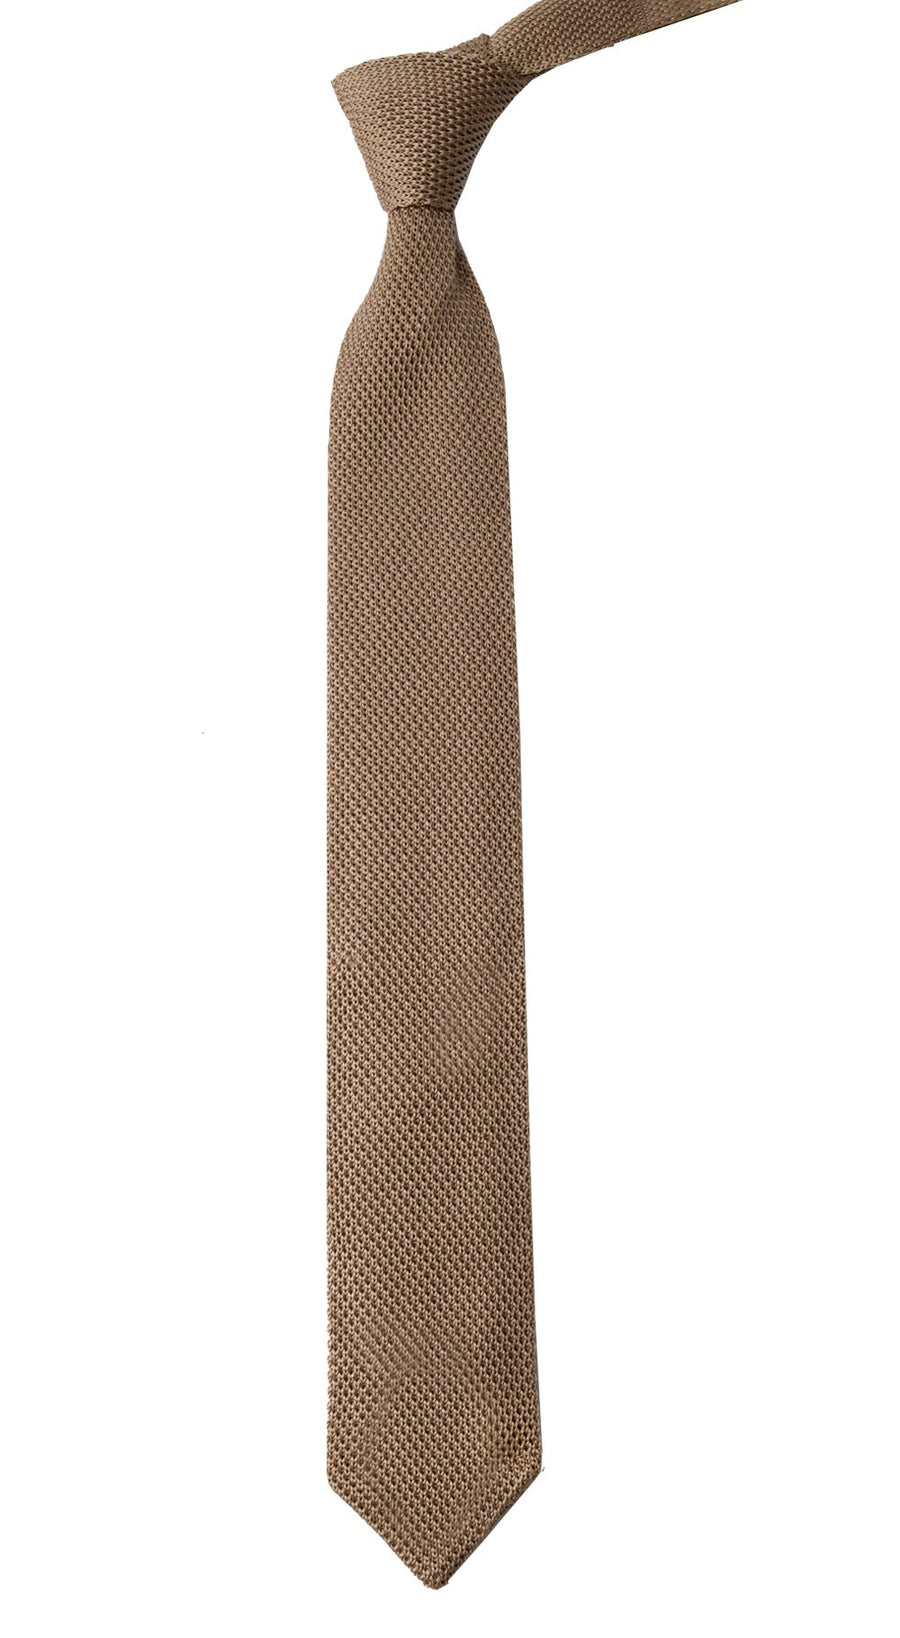 Pointed Tip Knit Light Champagne Tie | Silk Knit Ties | Tie Bar